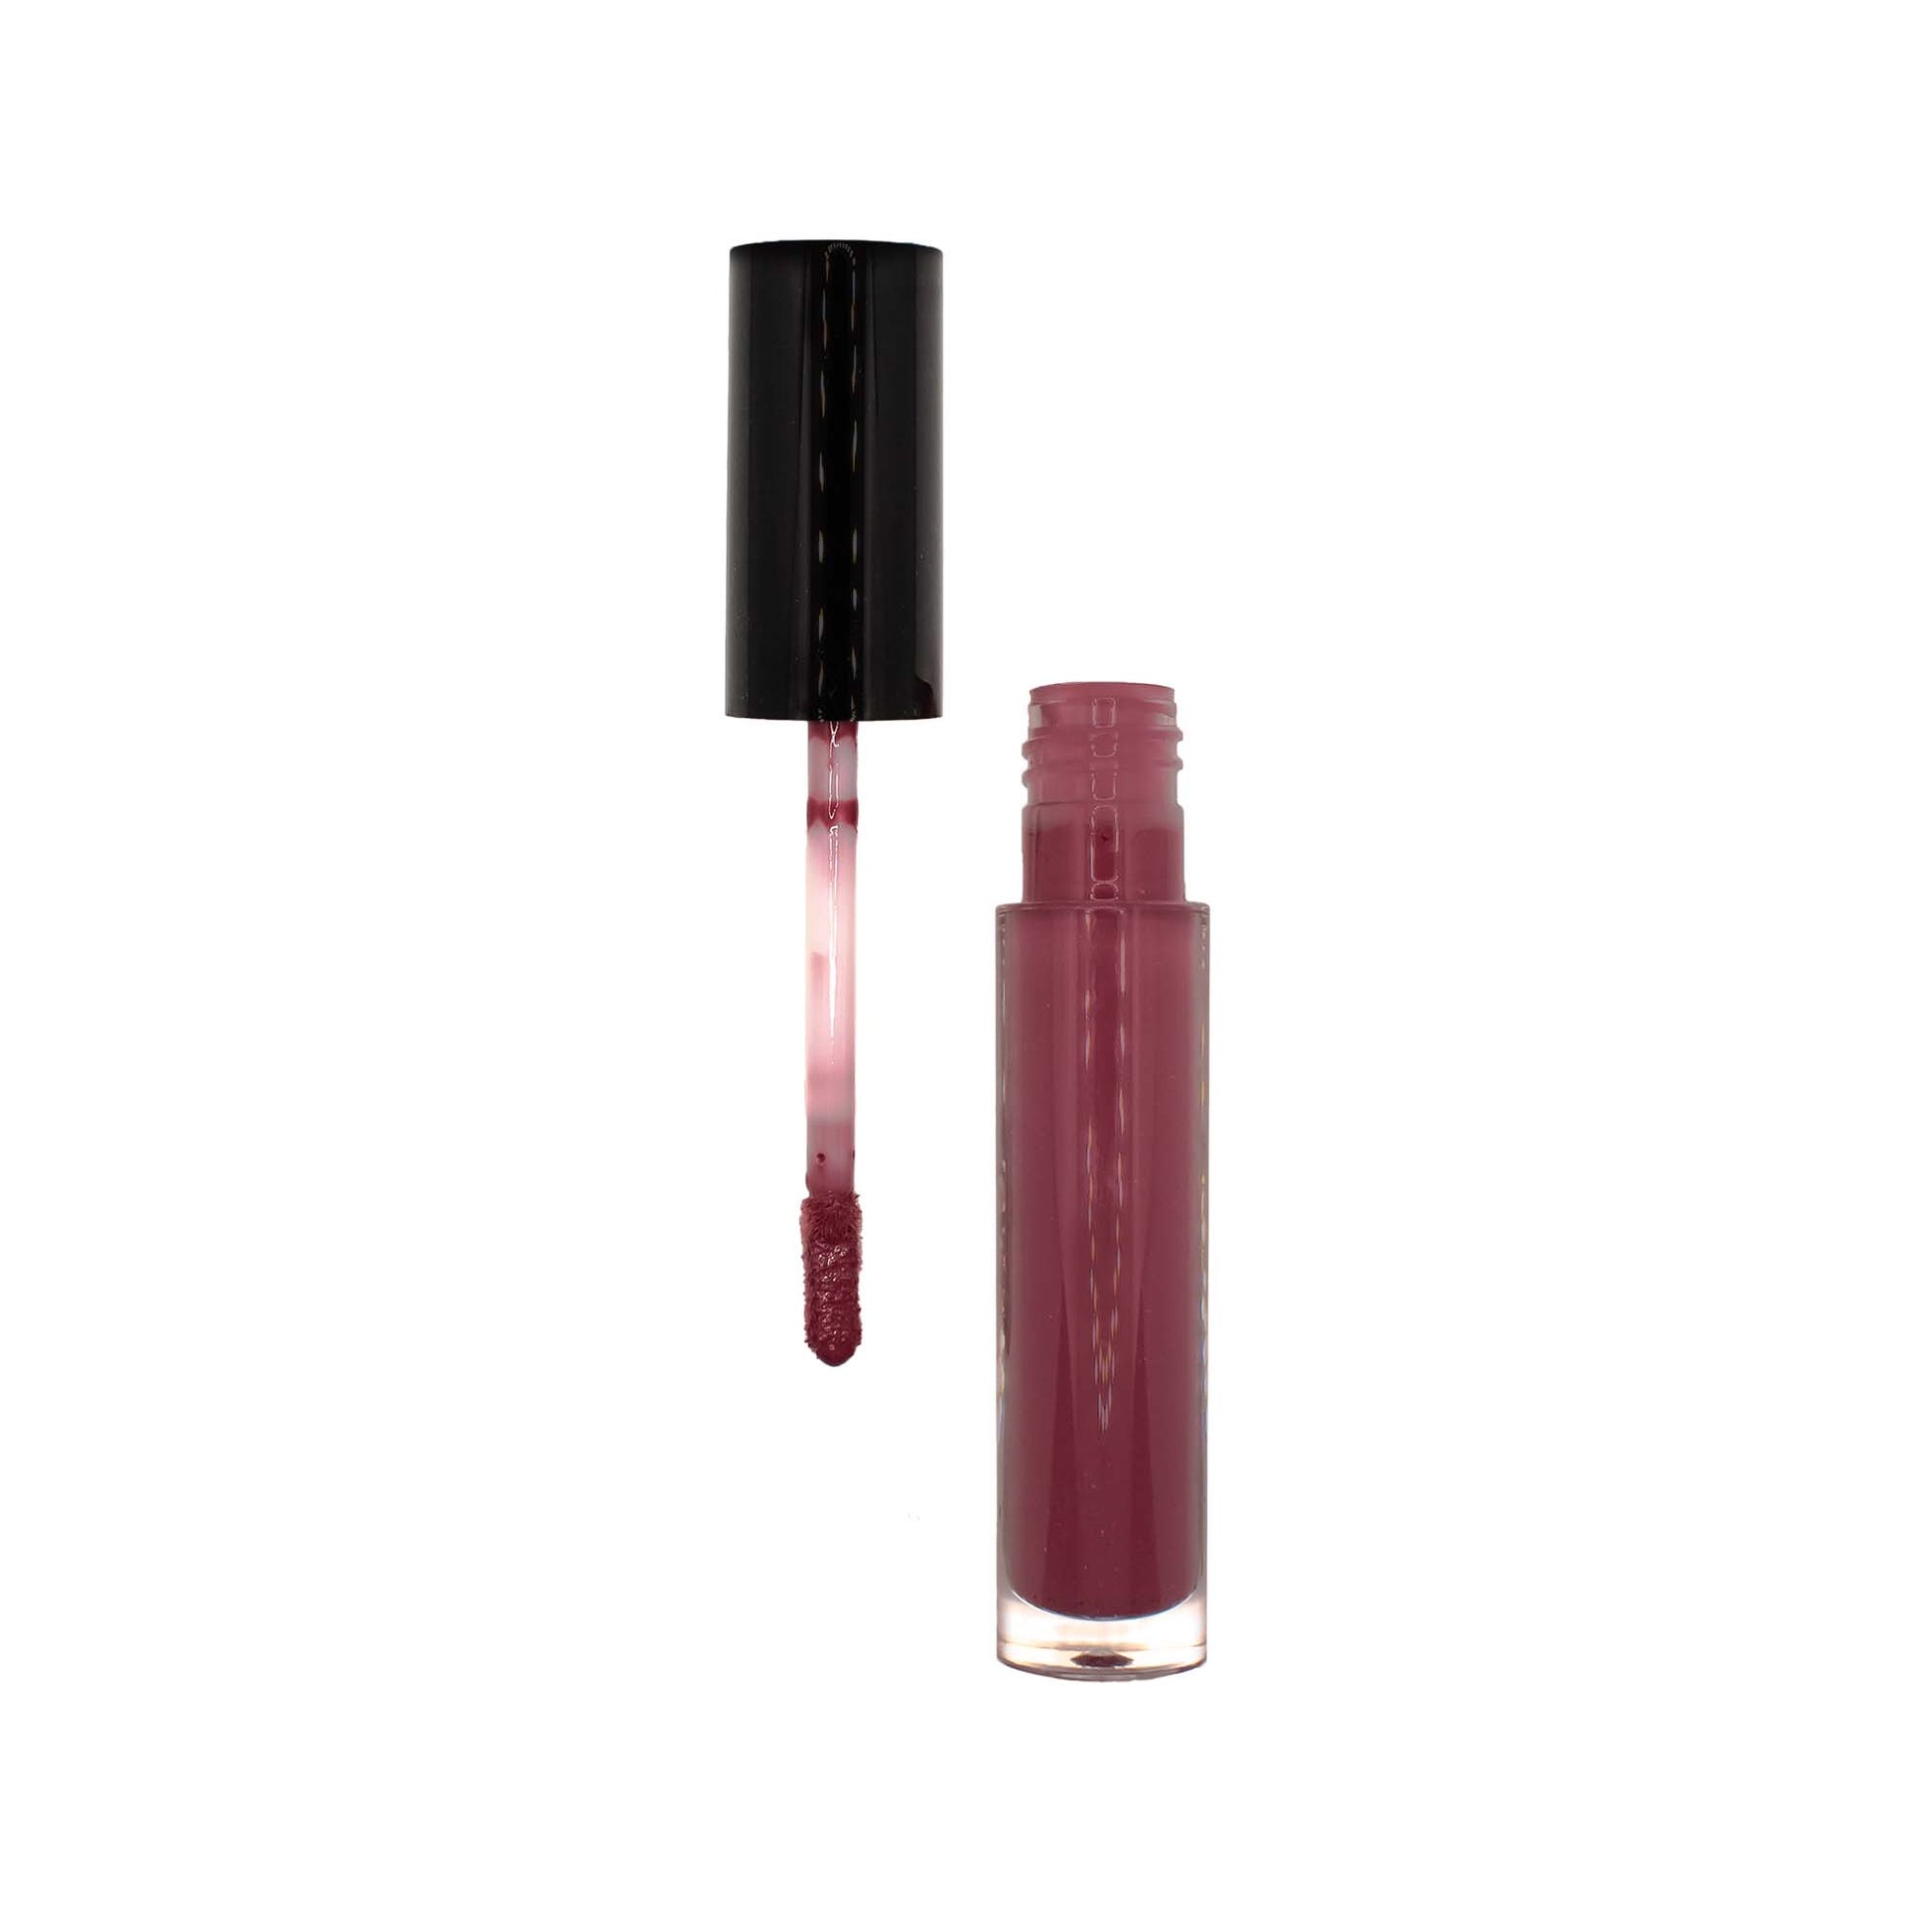 Cruisin Organics Pretty Lip Gloss. This pink lip gloss provides essential moisture and a revitalizing sheen all at once. This indispensable product from Cruisin Organics will assist you in keeping your lips feeling and looking their best.